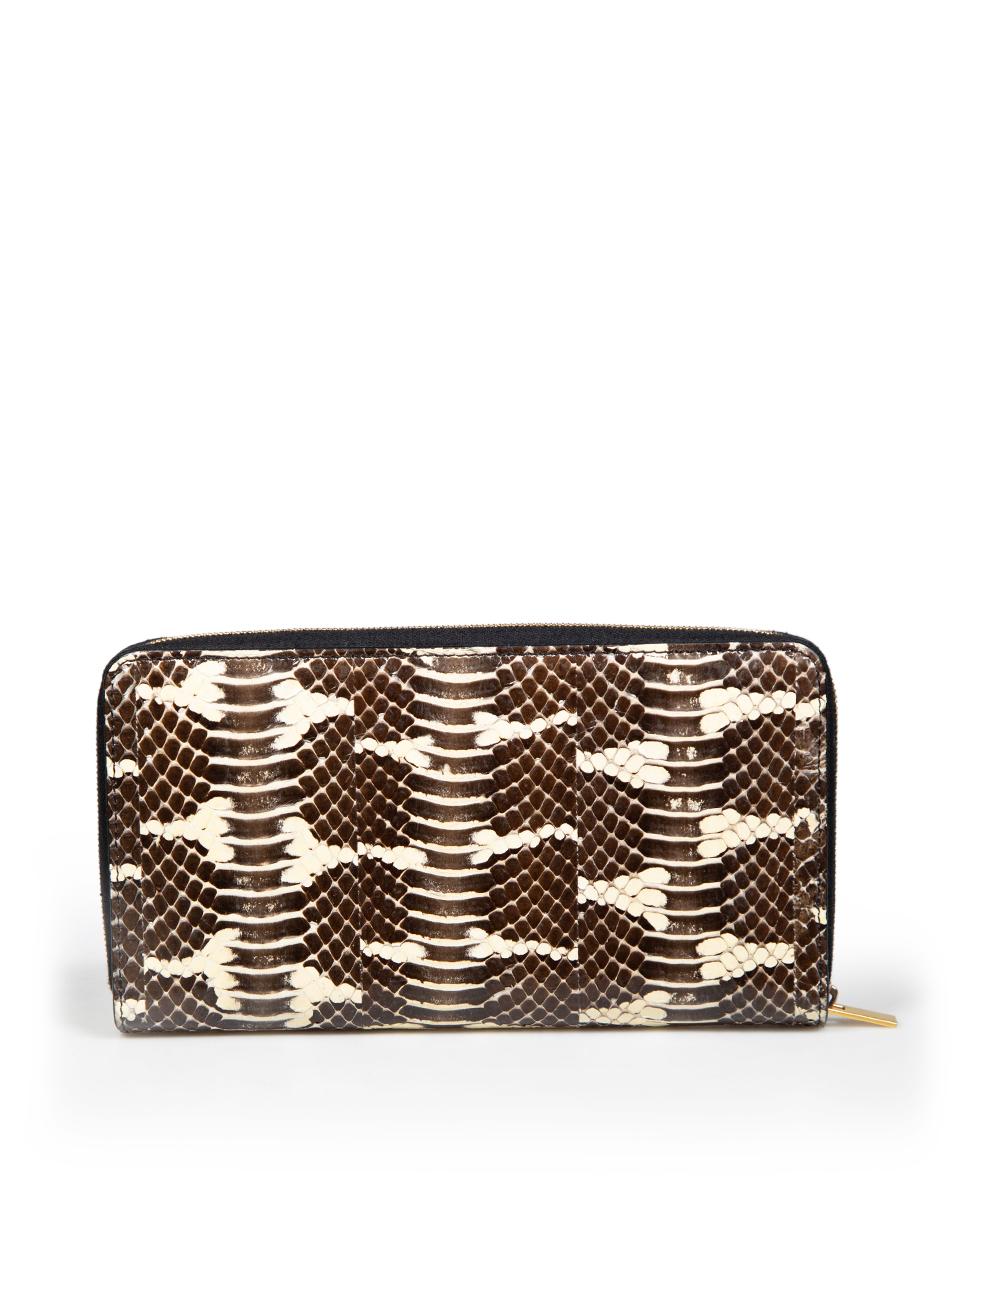 Céline Brown Python Leather Zip Around Wallet In Excellent Condition For Sale In London, GB